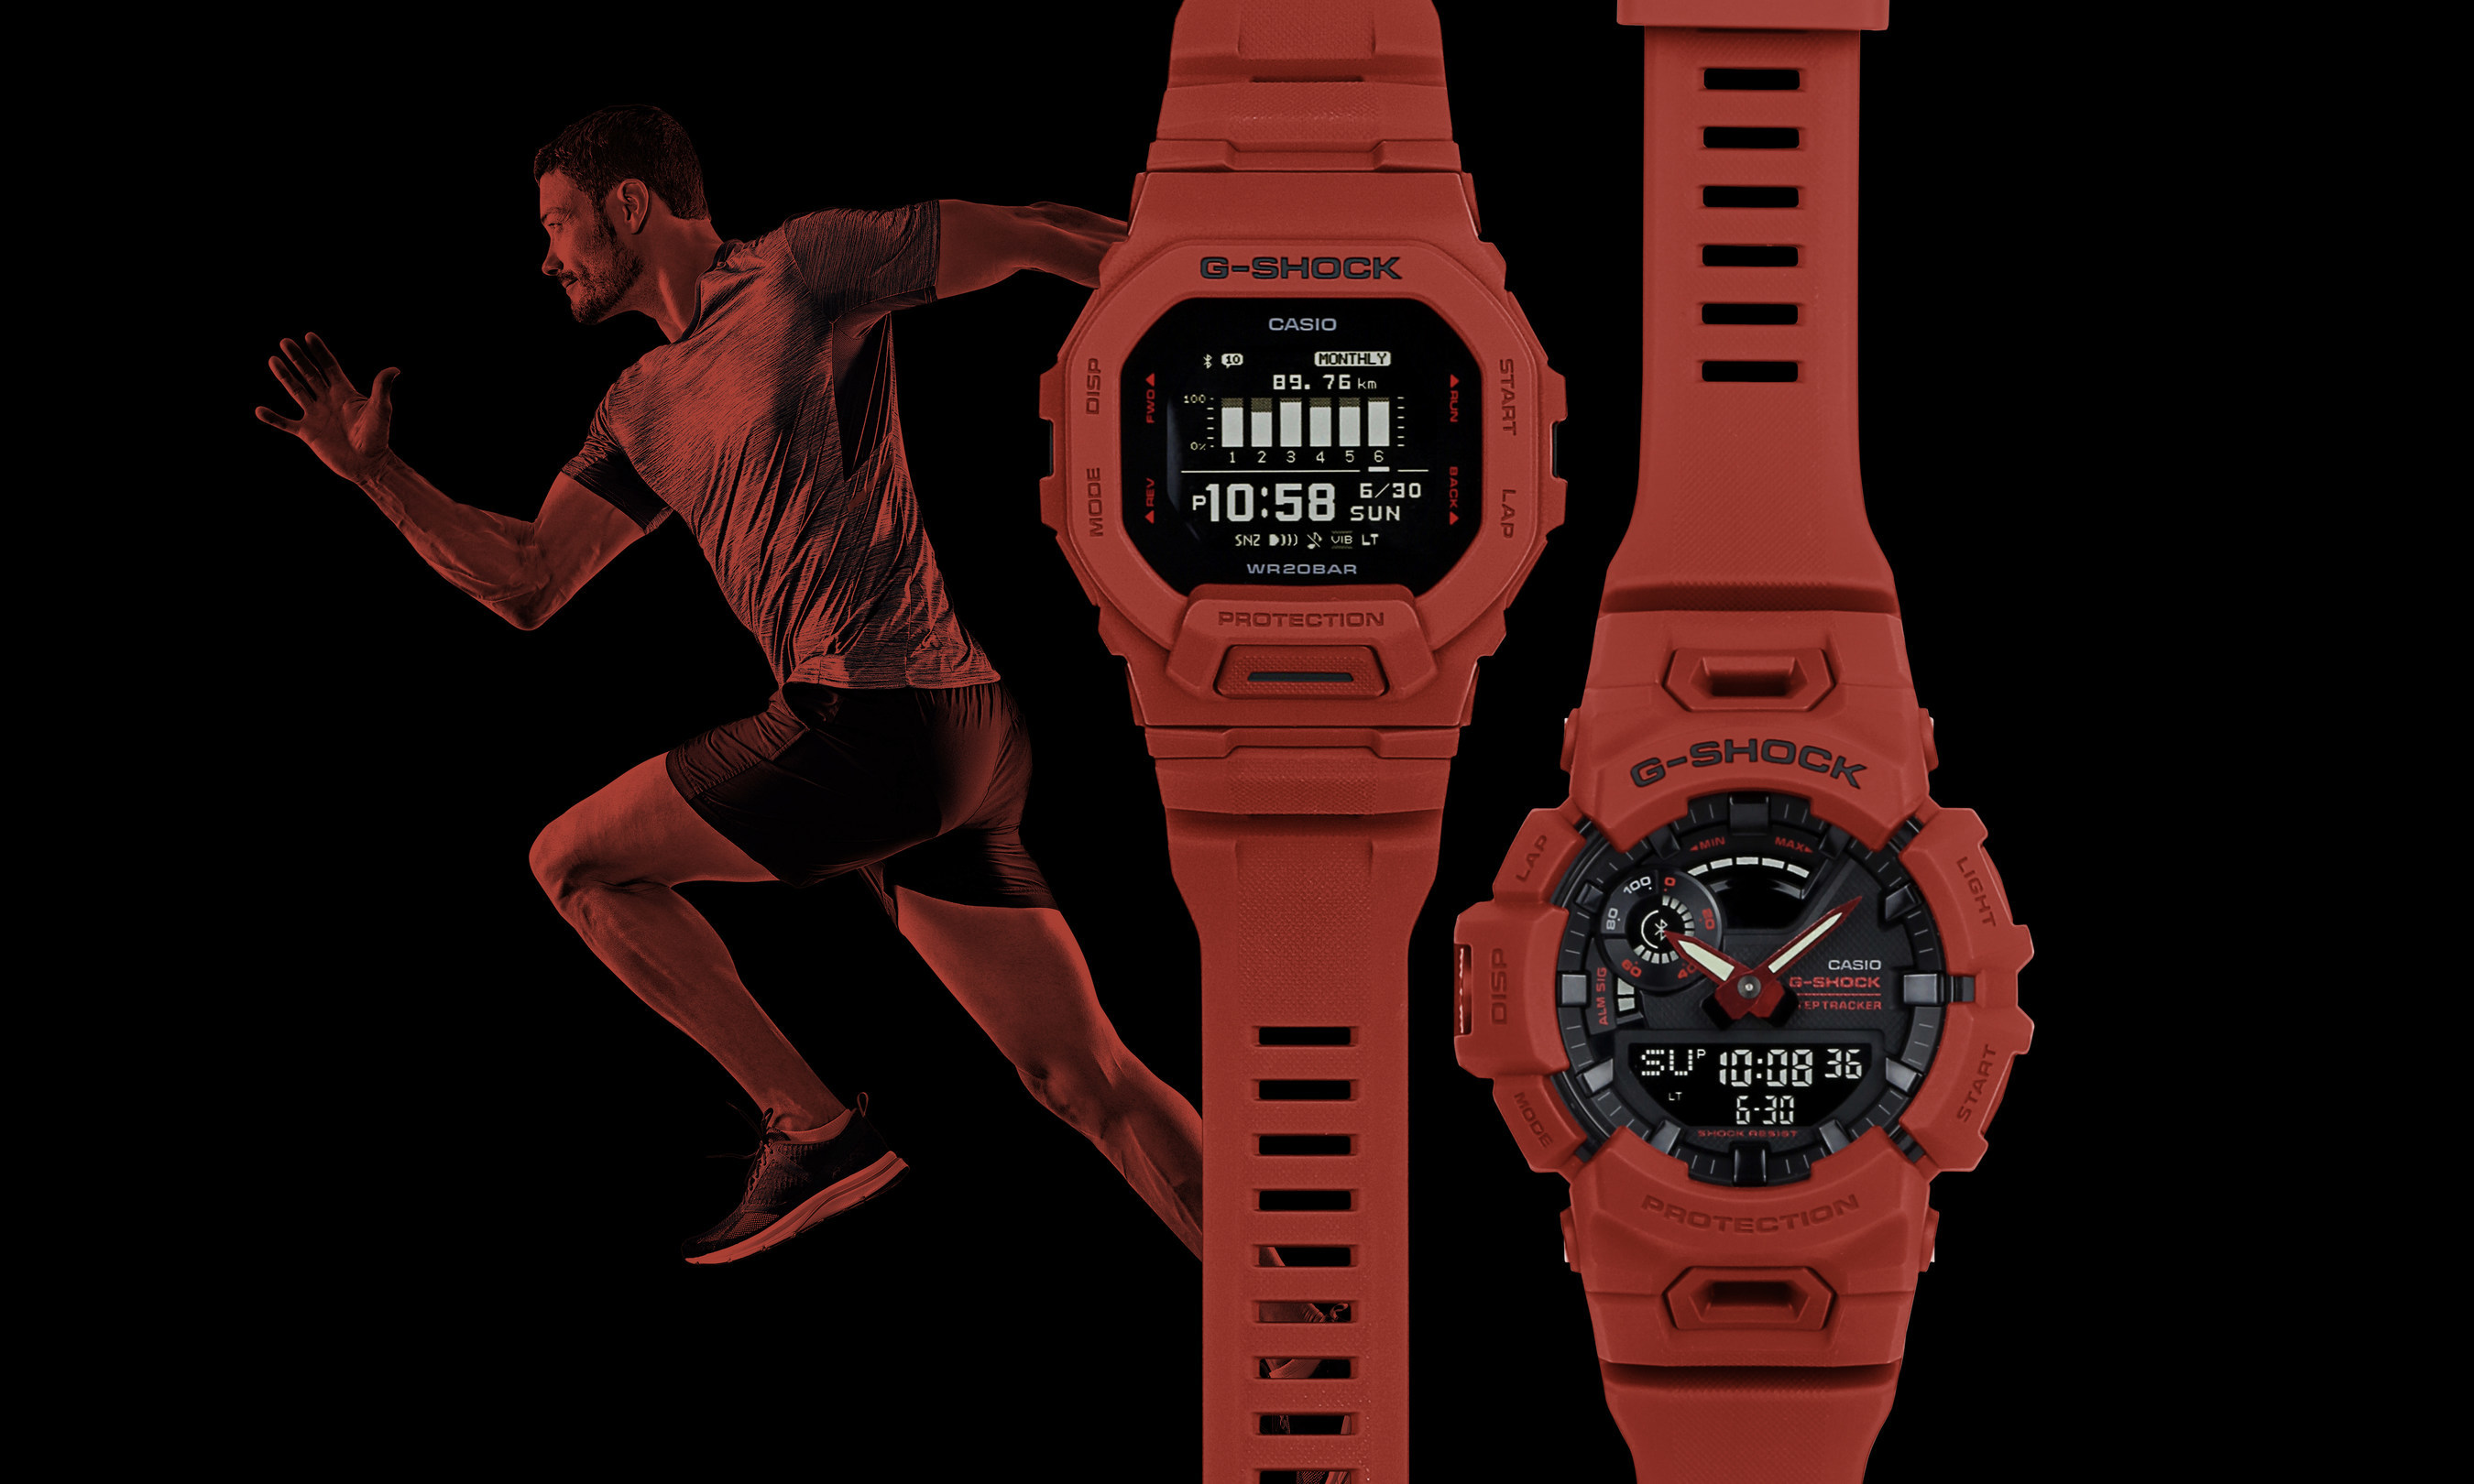 G-SHOCK INTRODUCES NEW BURNING RED SERIES TO ENHANCE SPORT PERFORMANCE